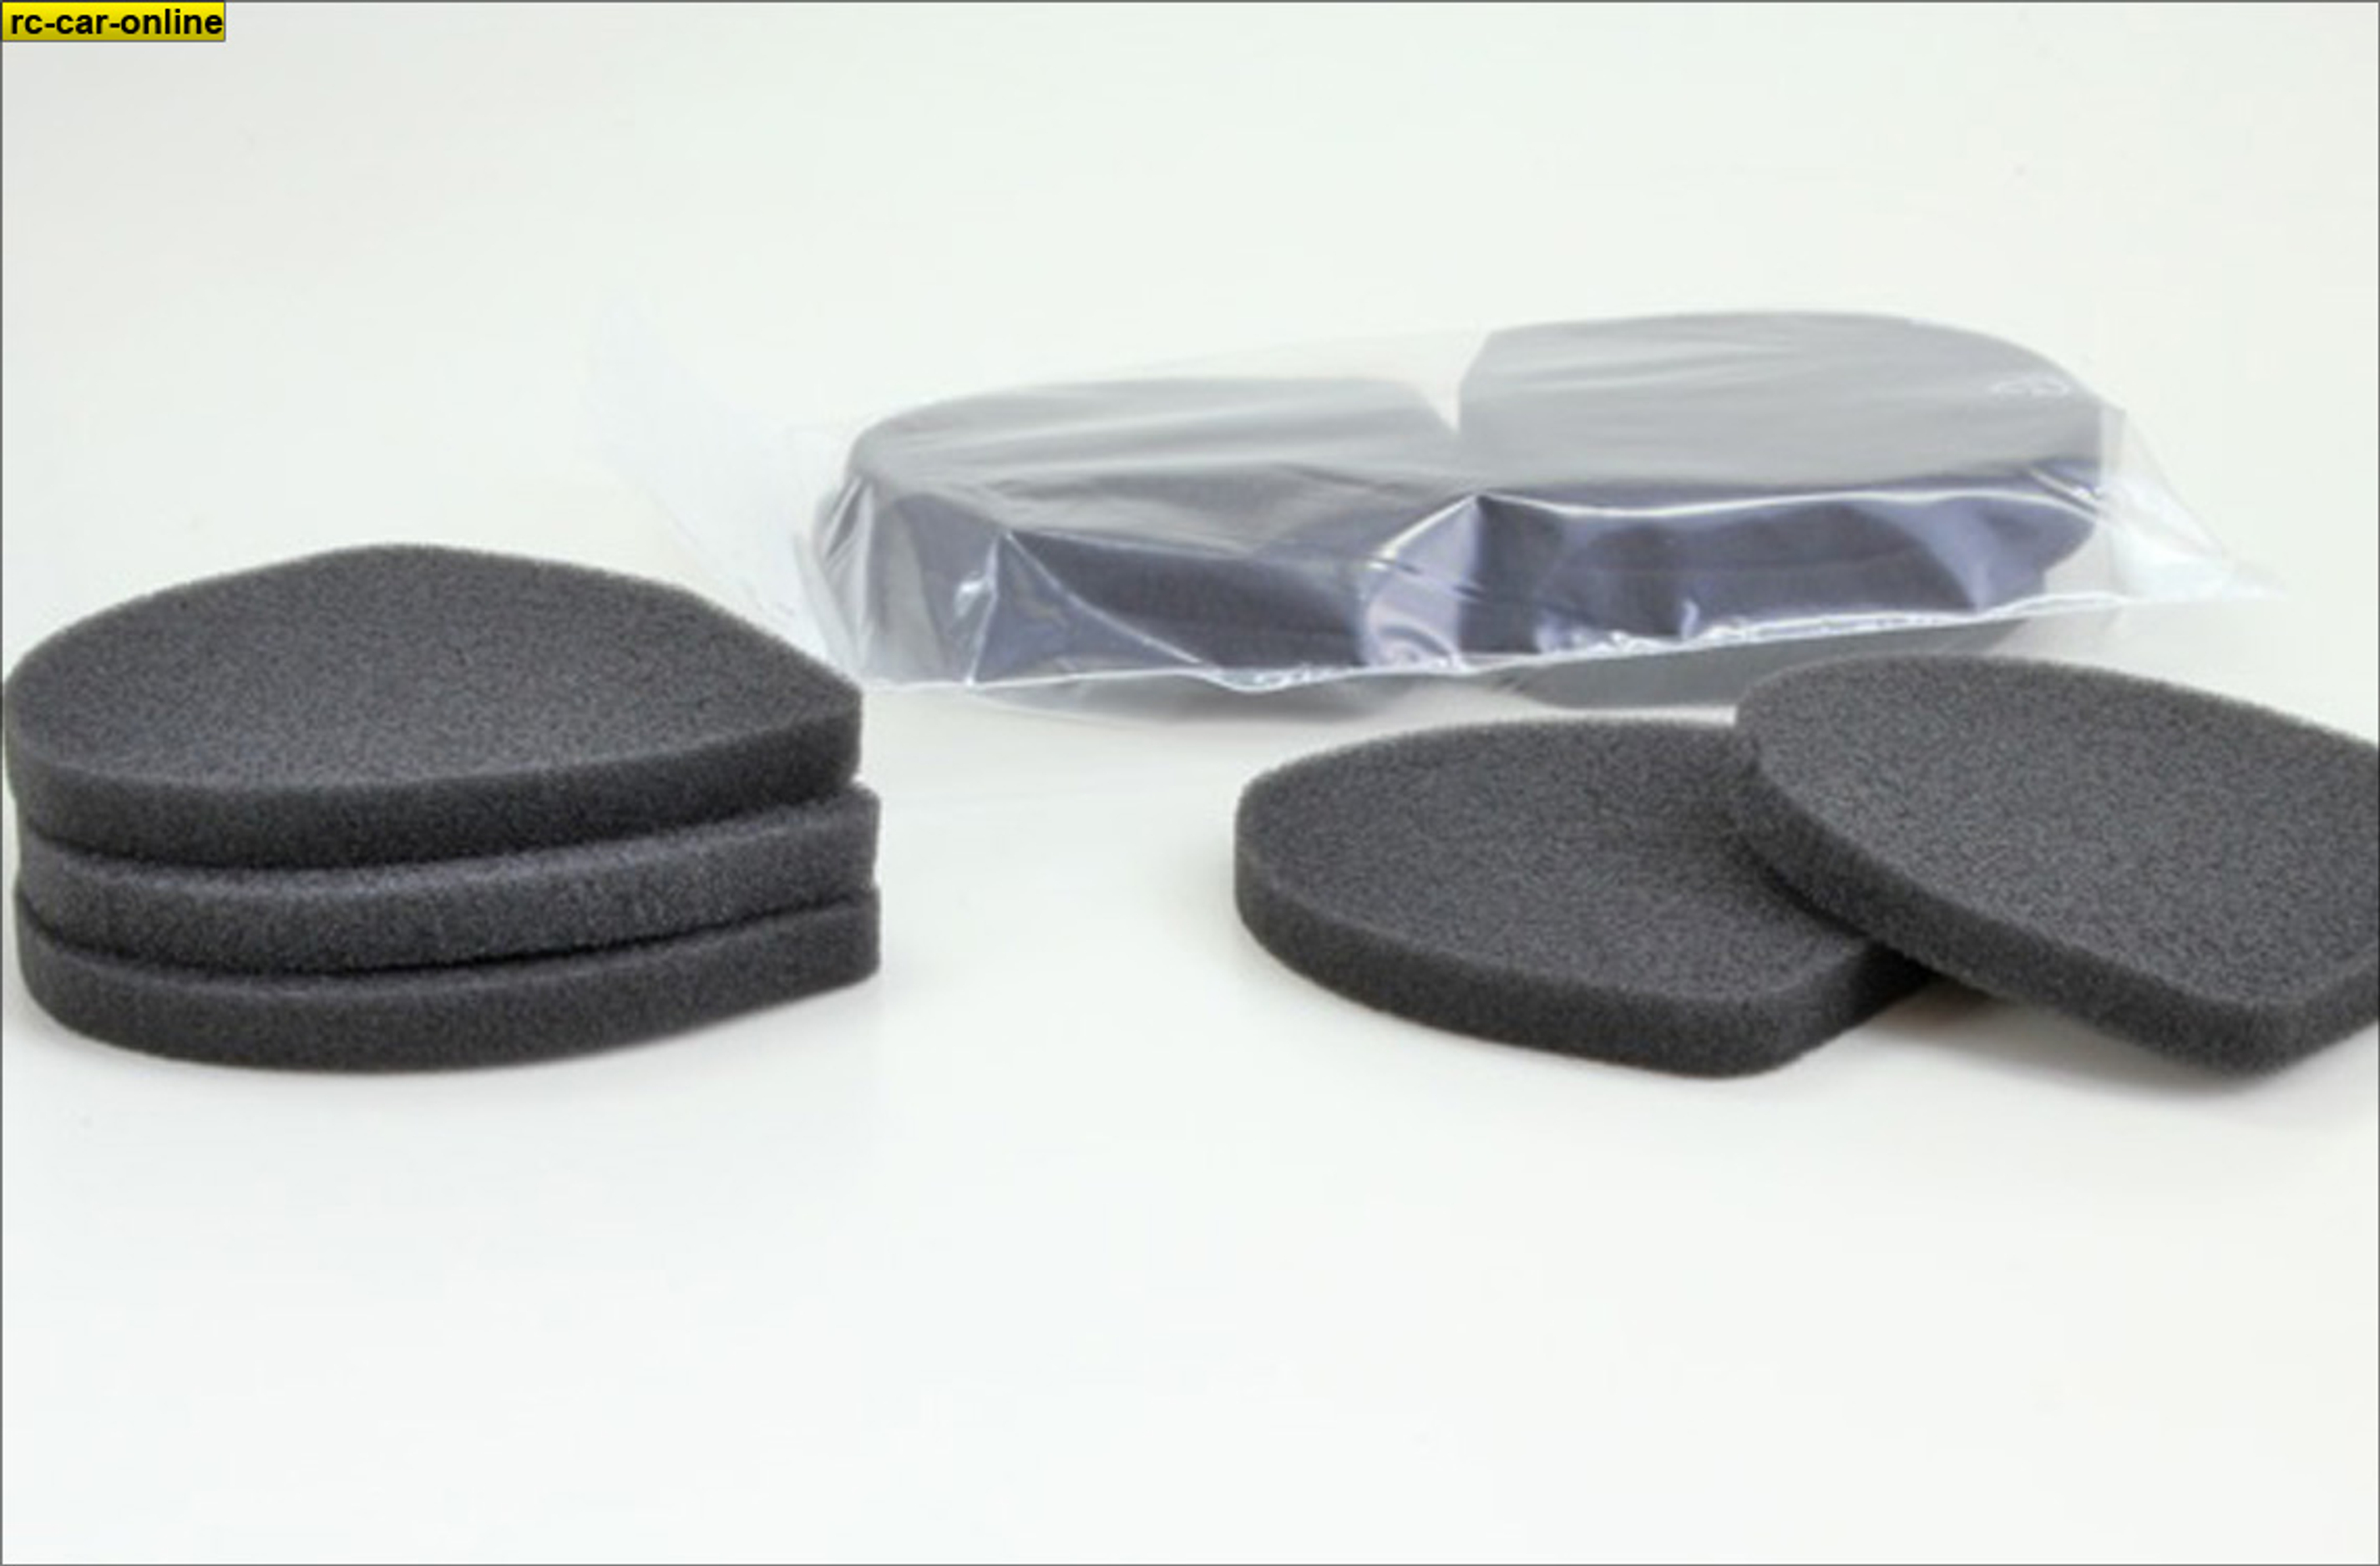 51023100 LIGHTSCALE filter pad for F1 airbox, 5 pcs.